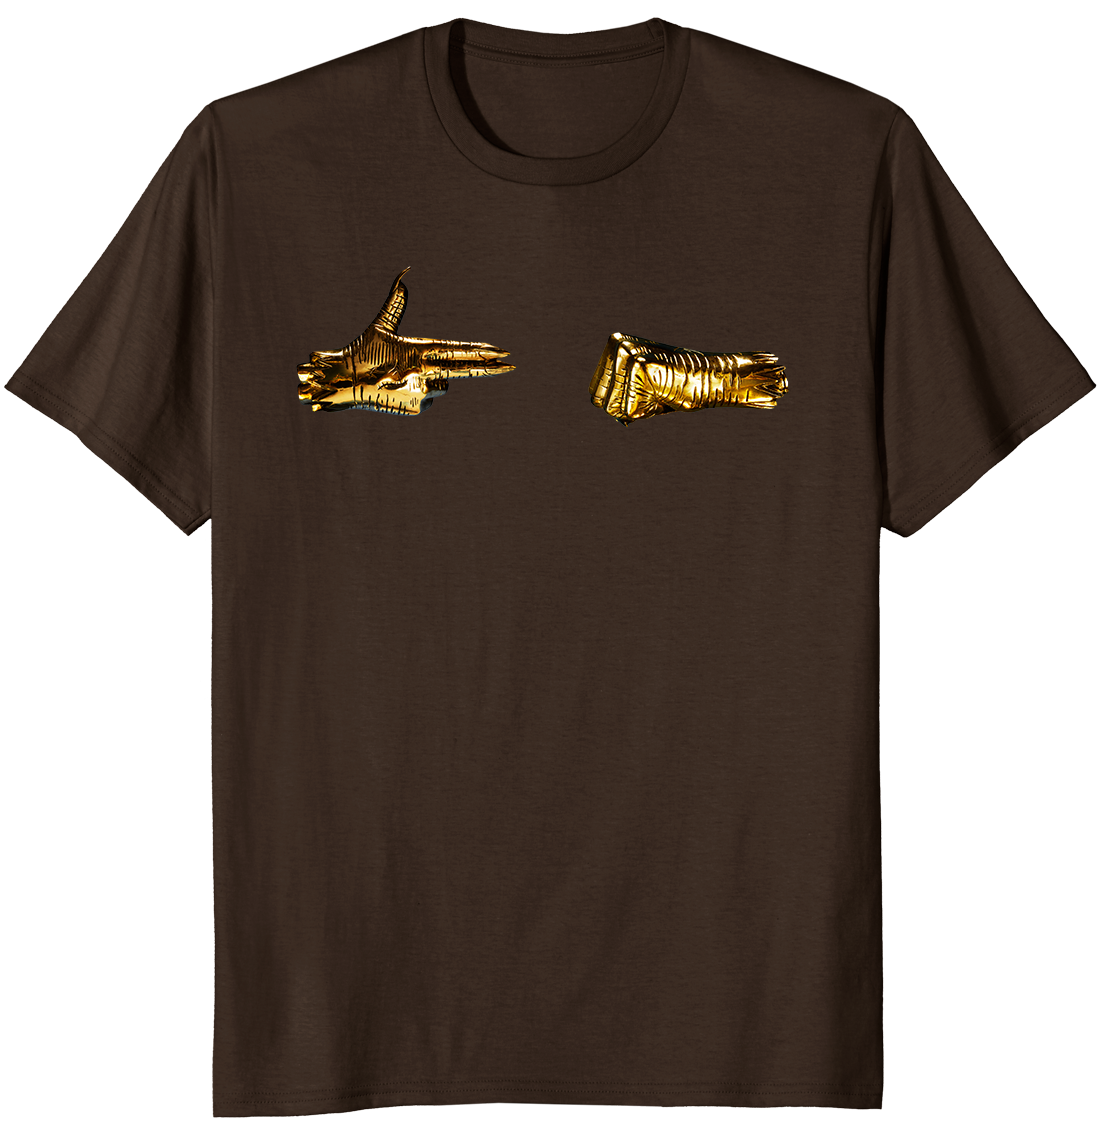 Run The Jewels | RTJ3 T-shirt (Brown) | RTJ Official Store